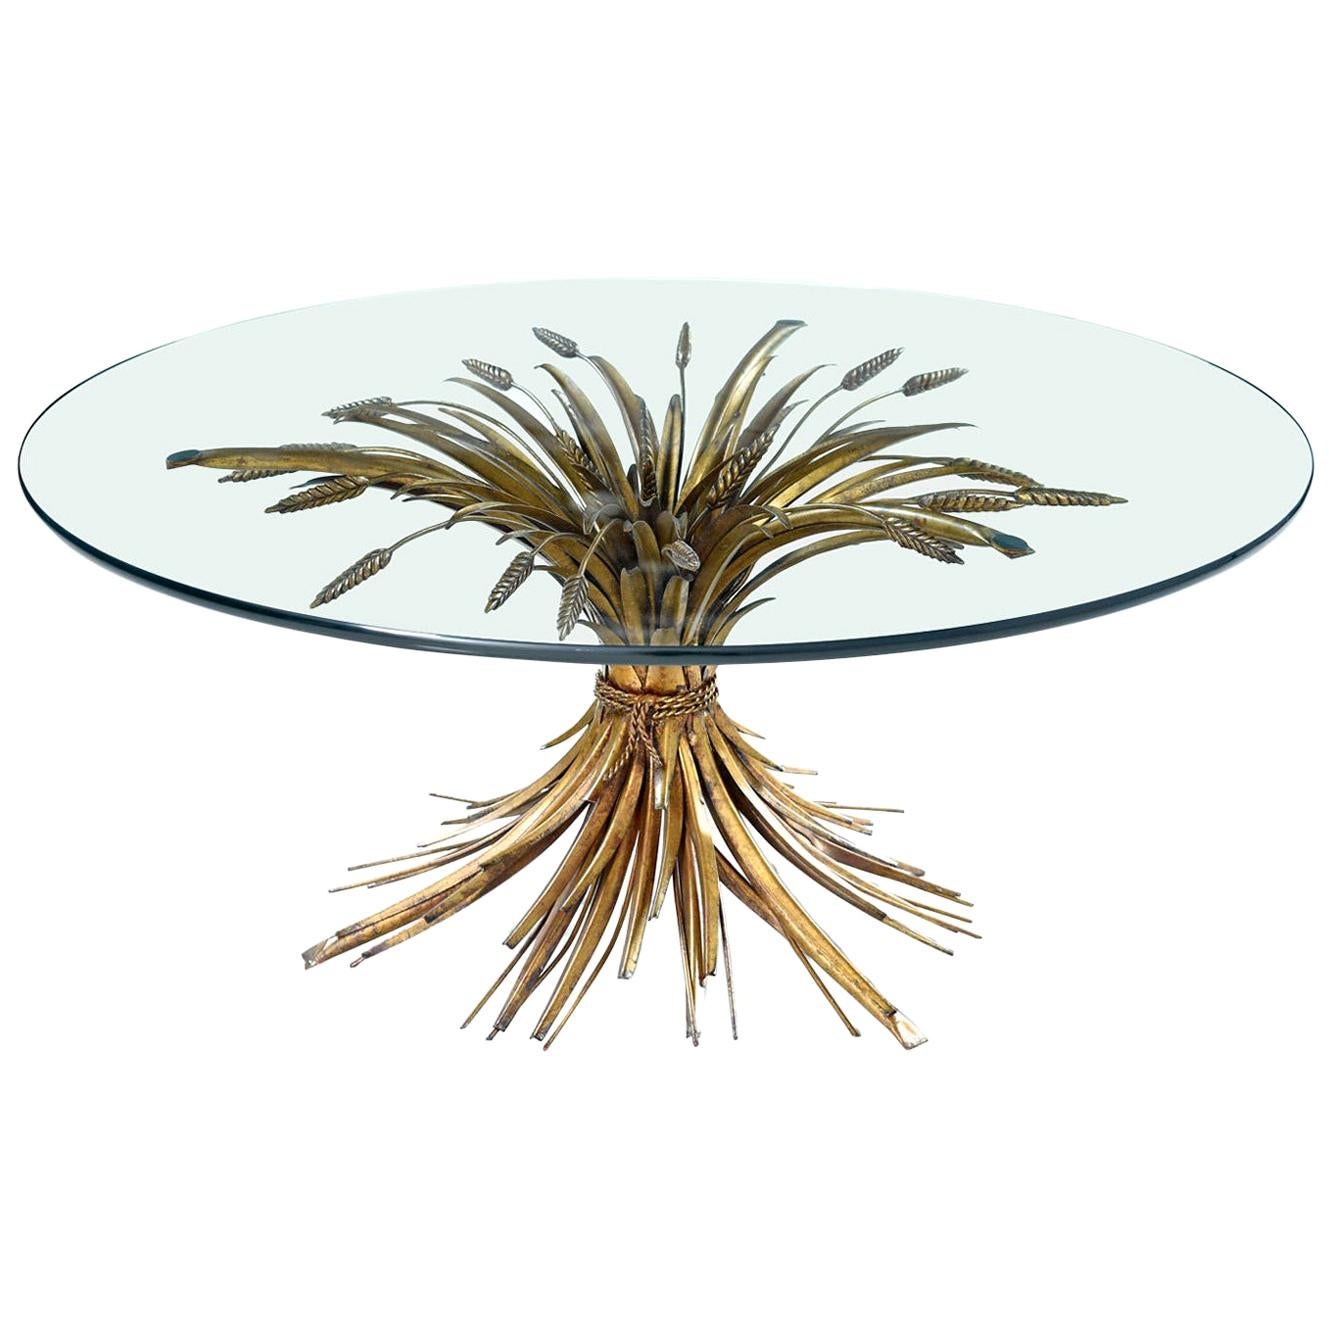 Elegant and luxurious, this Italian Hollywood Regency table glamorizes the humble wheat sheaf. The coffee table is made of sculpted metal with a gold gilt finish and topped with a piece of circular glass. The circle glass top balances on top of the